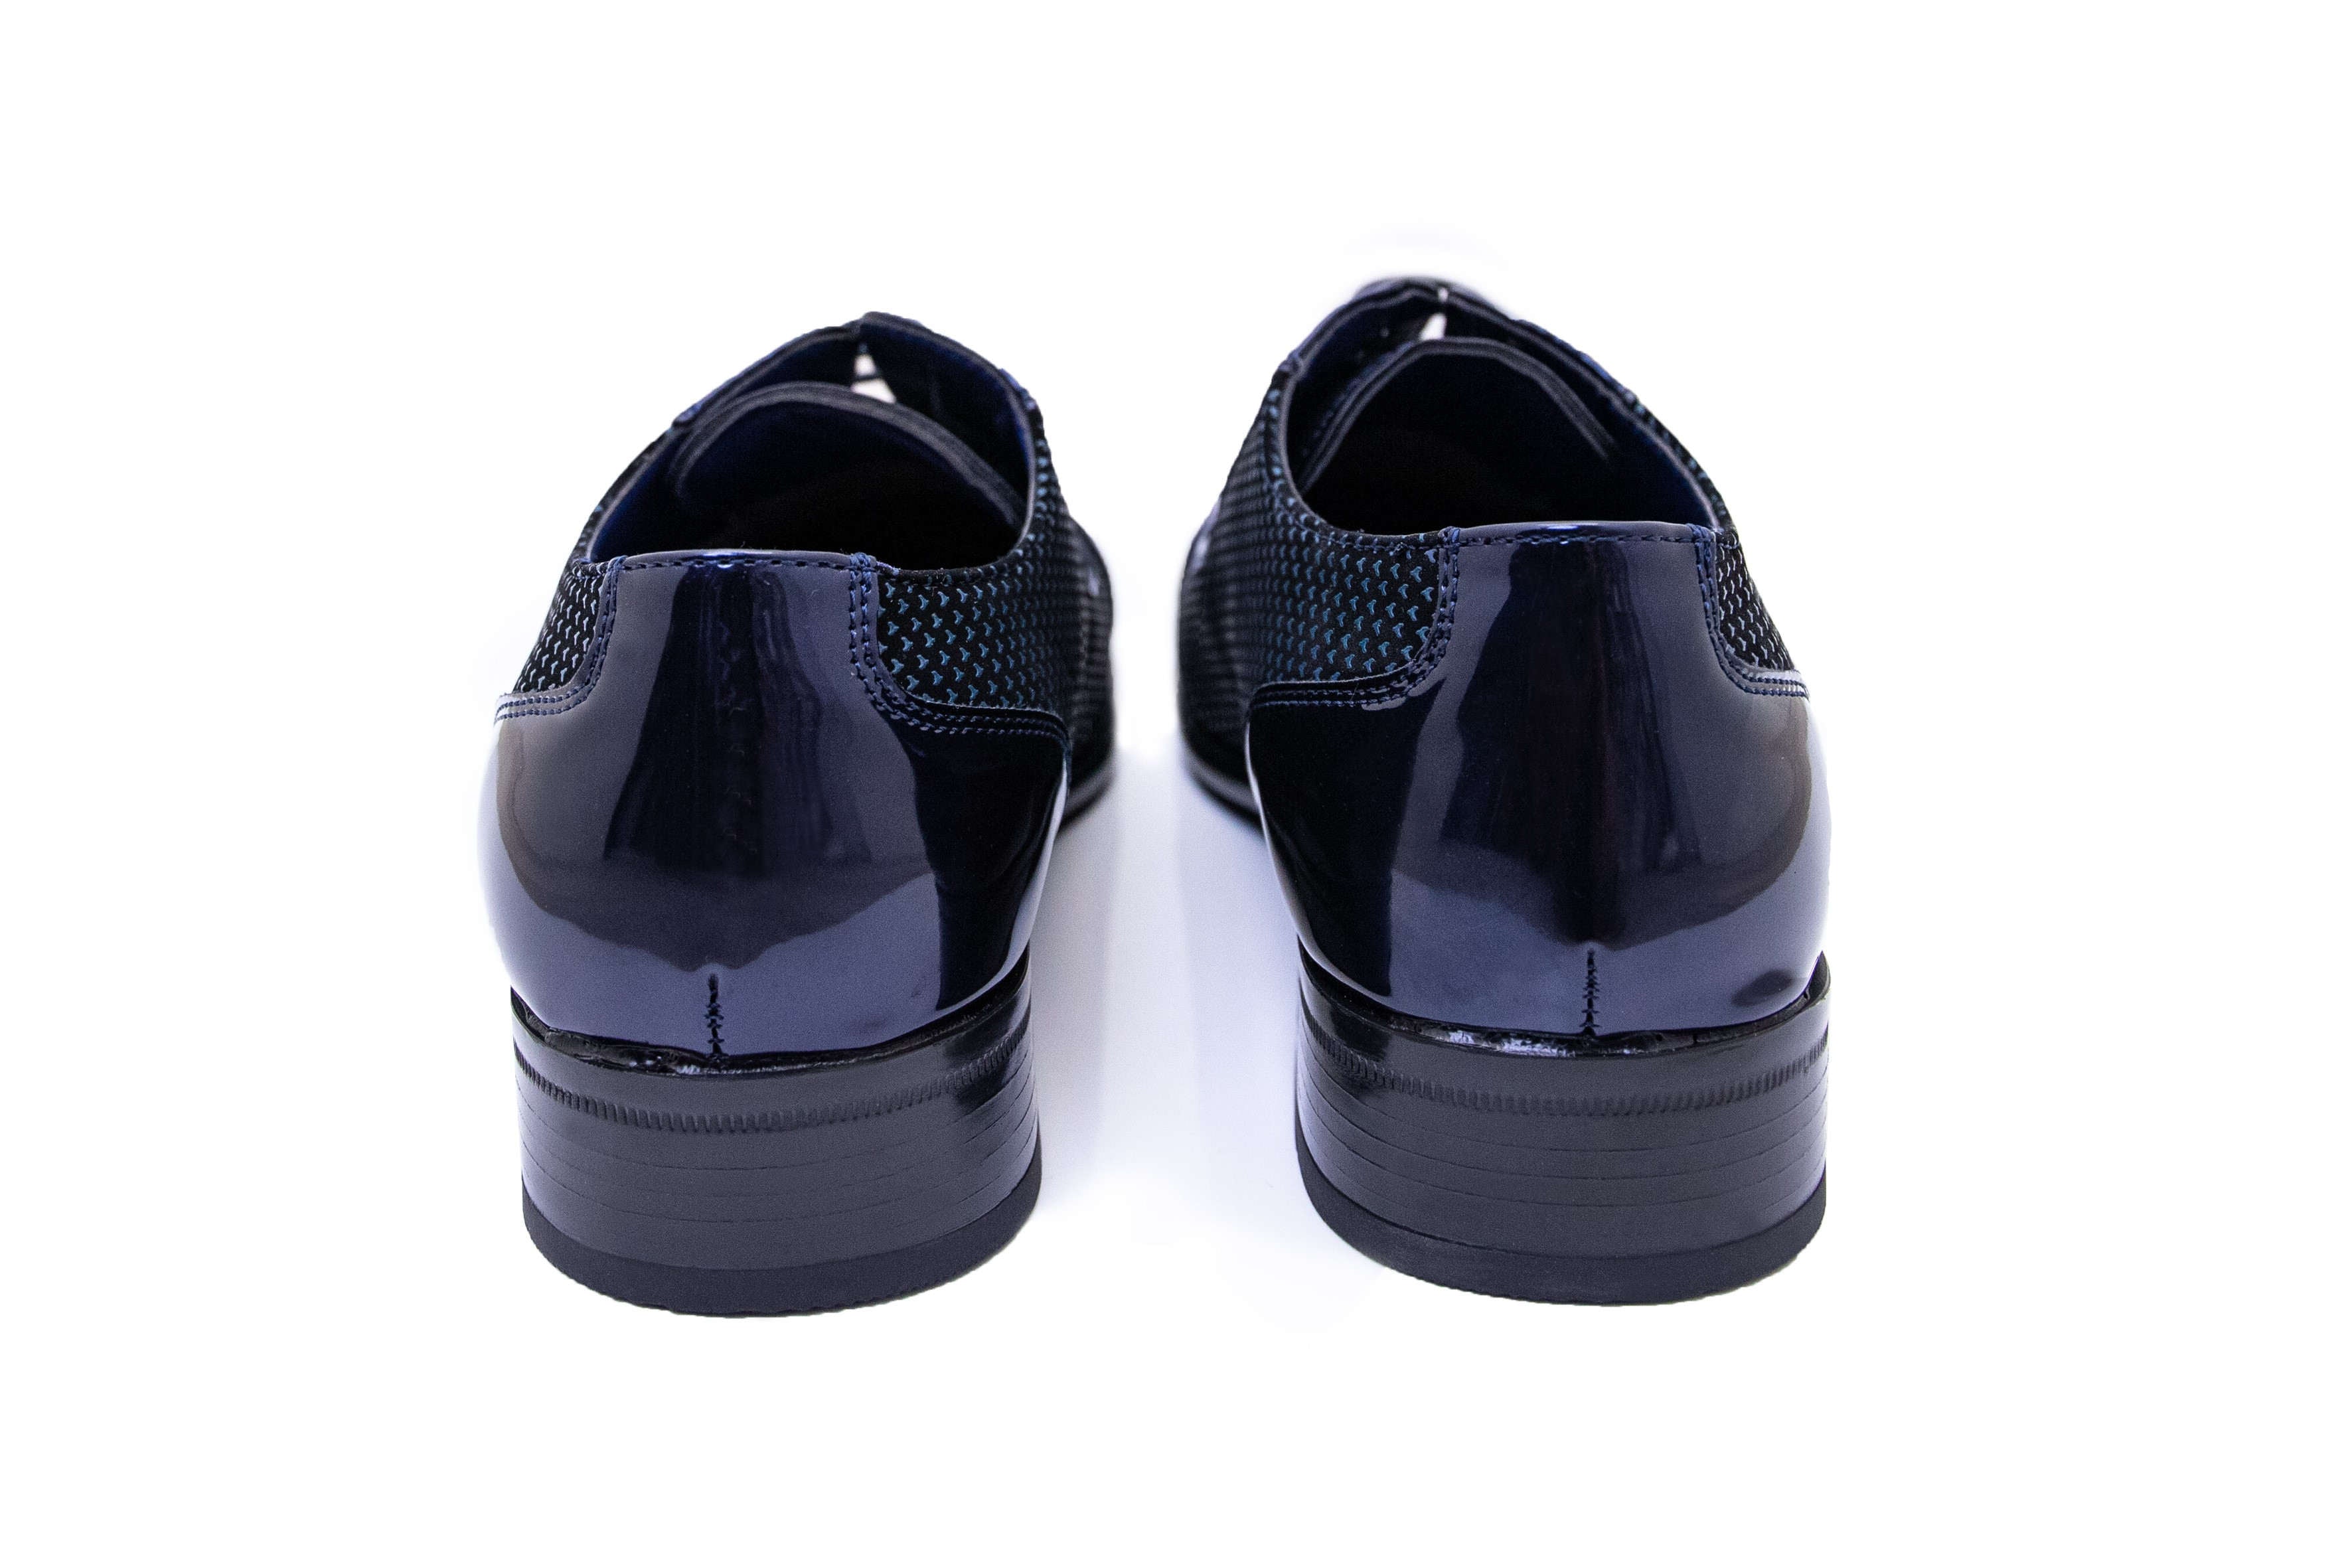 PATENT LEATHER LACE UP SHOES IN TWO TONE